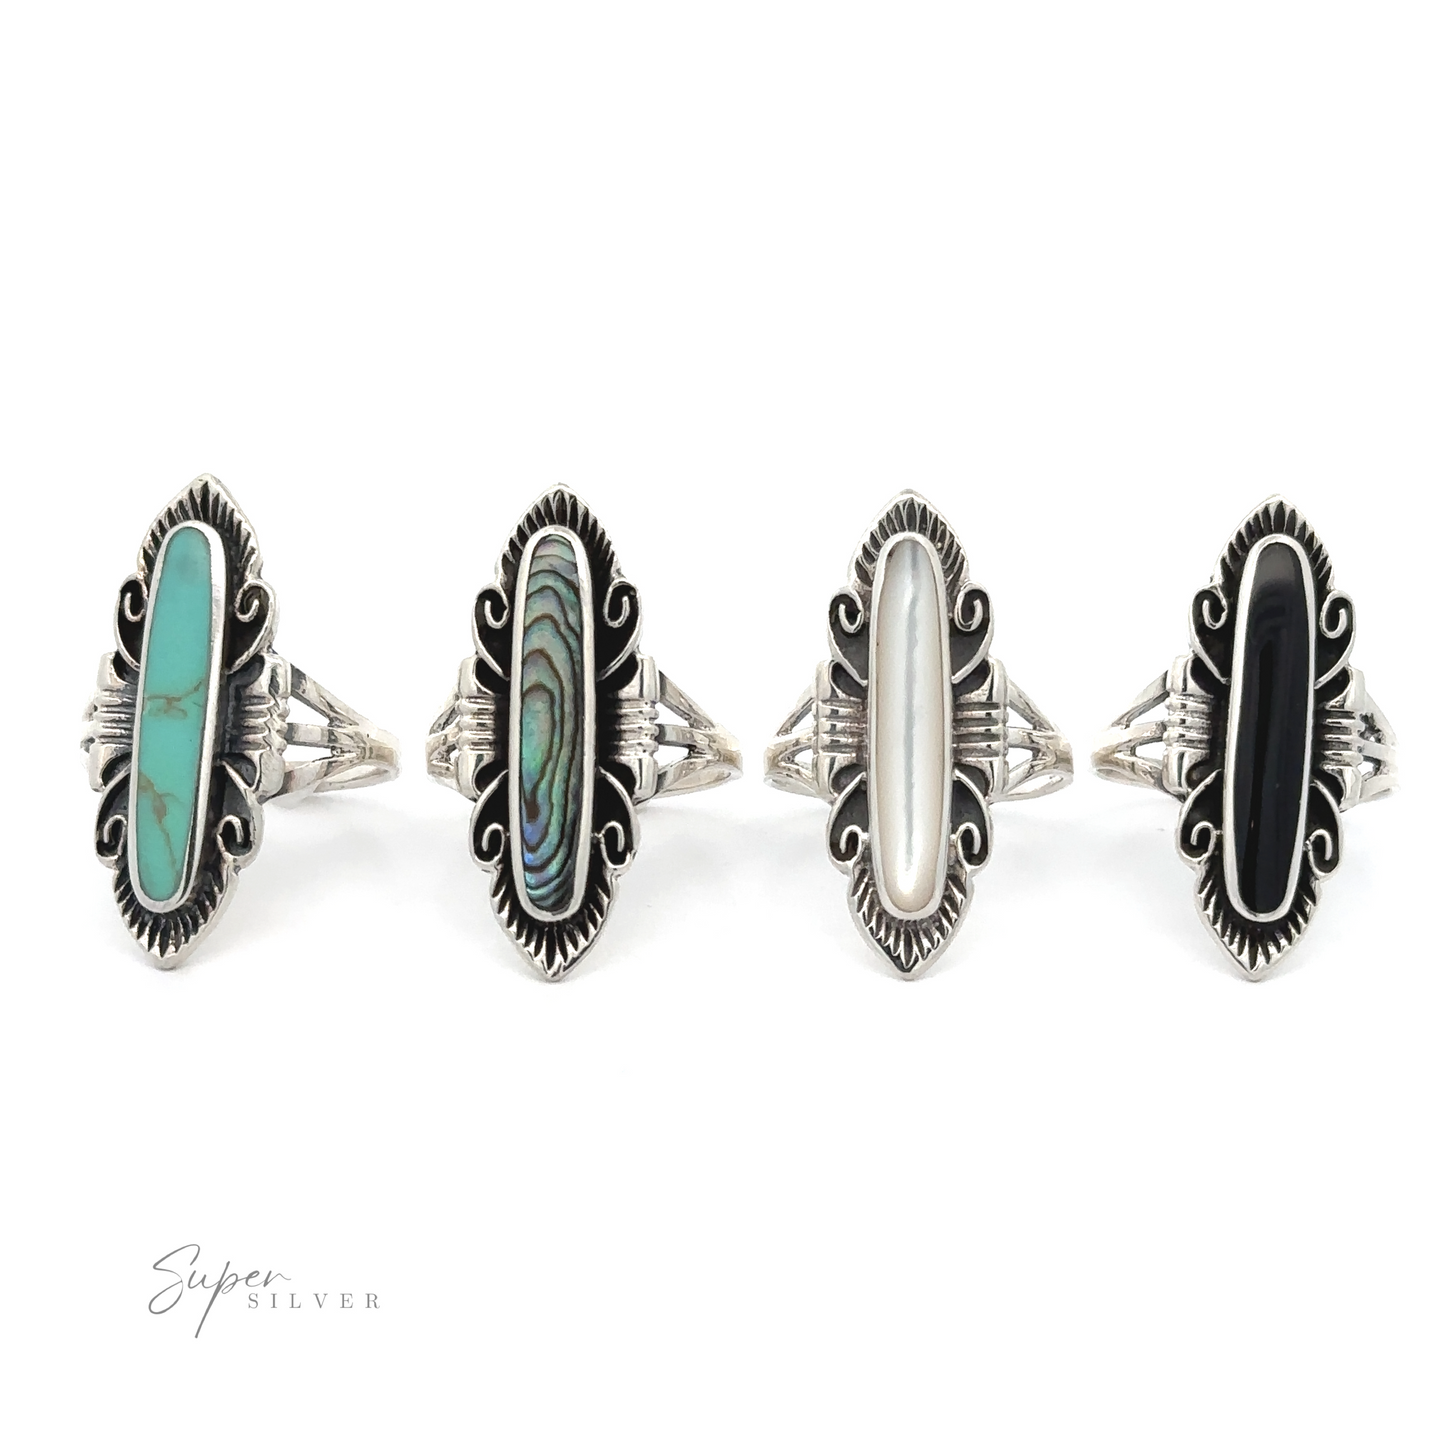 A set of four Elegant Southwest Inspired Rings with Inlaid Stone.